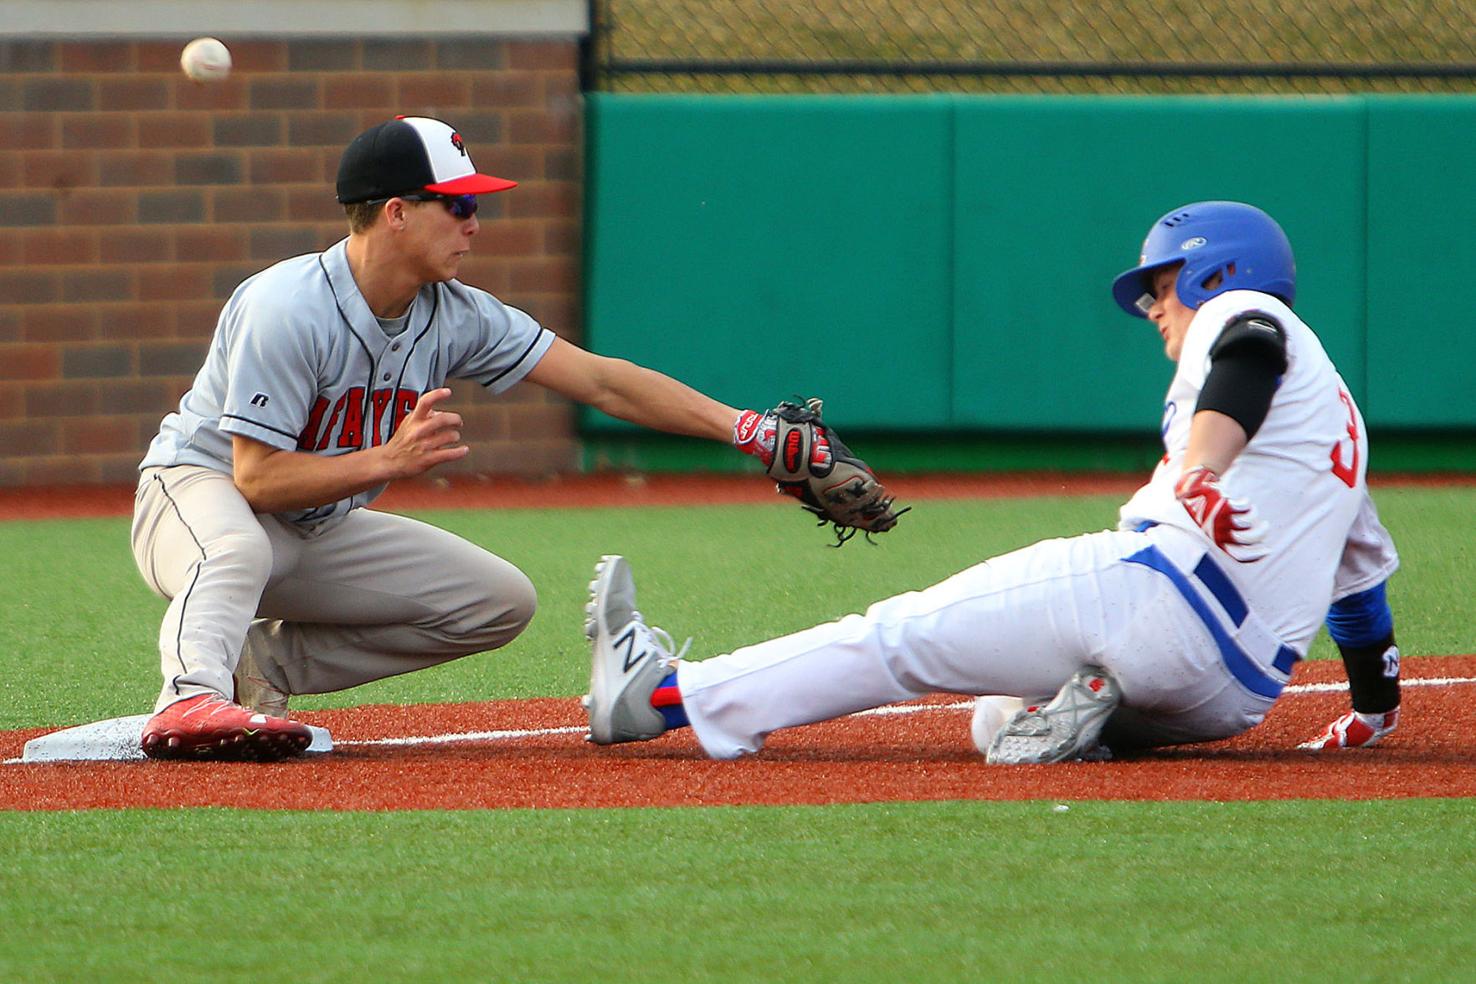 BASEBALL: No. 2 Kokomo plays in Best of Midwest today, Saturday